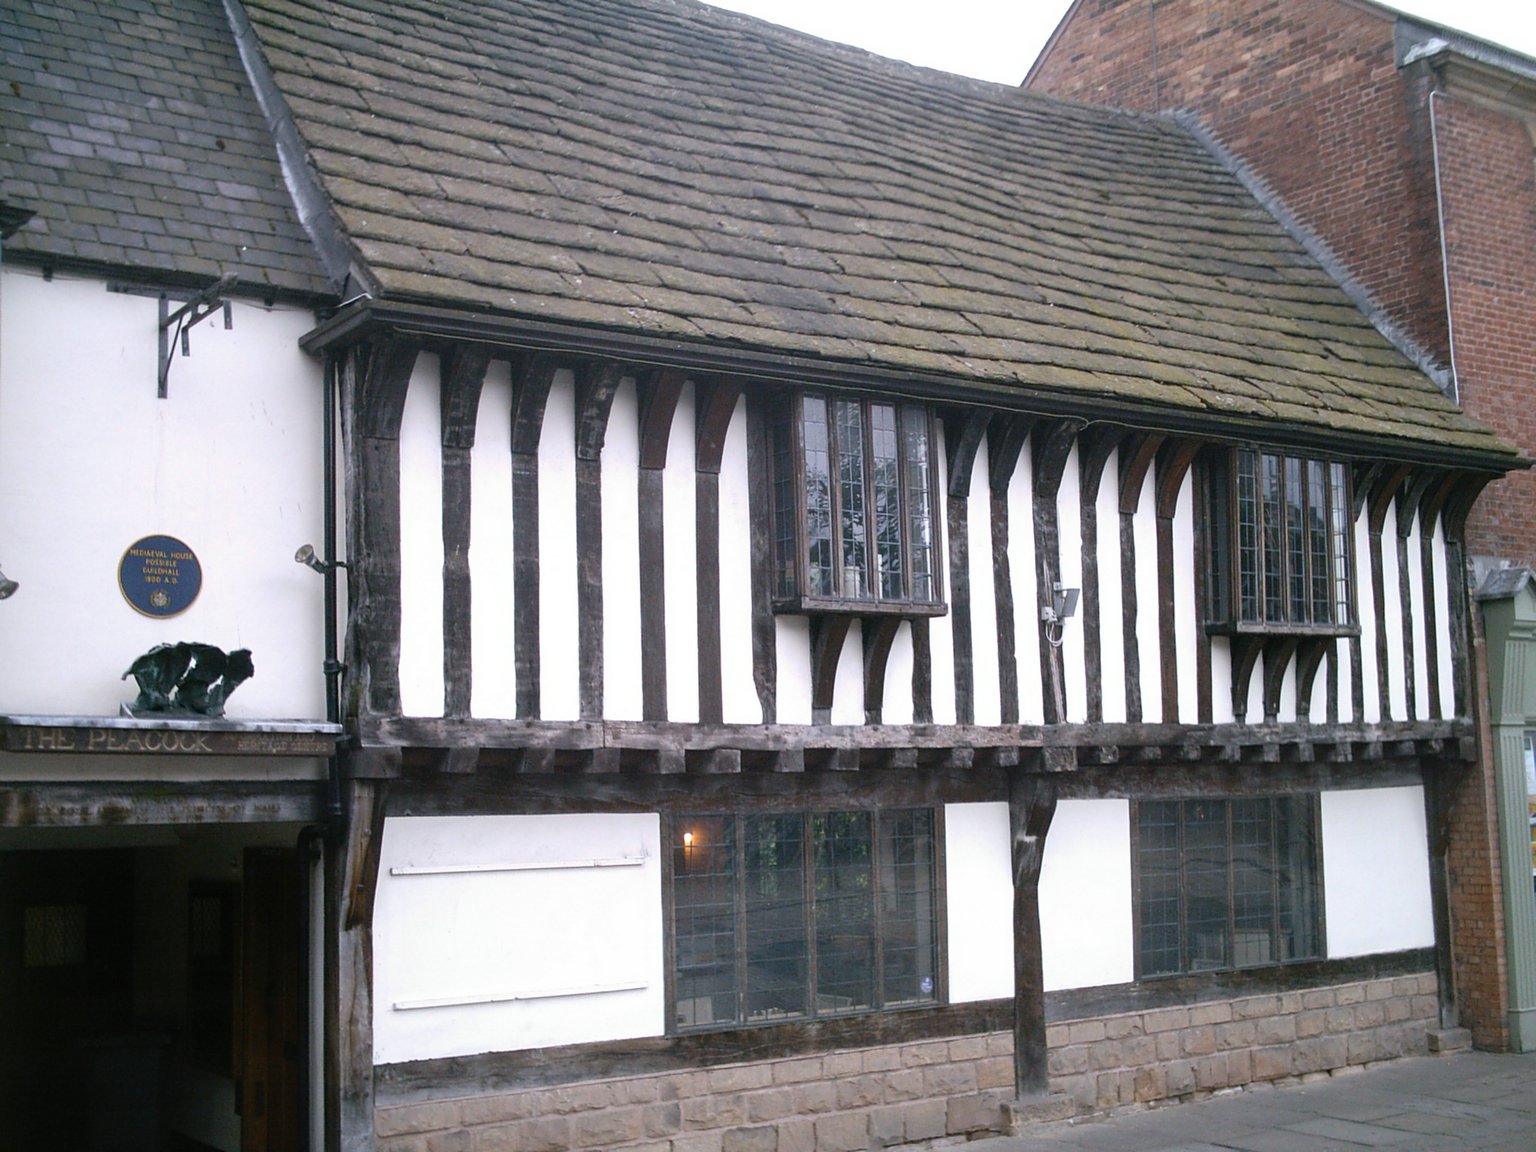 [Chesterfield+old+house+possible+guildhall.jpg]